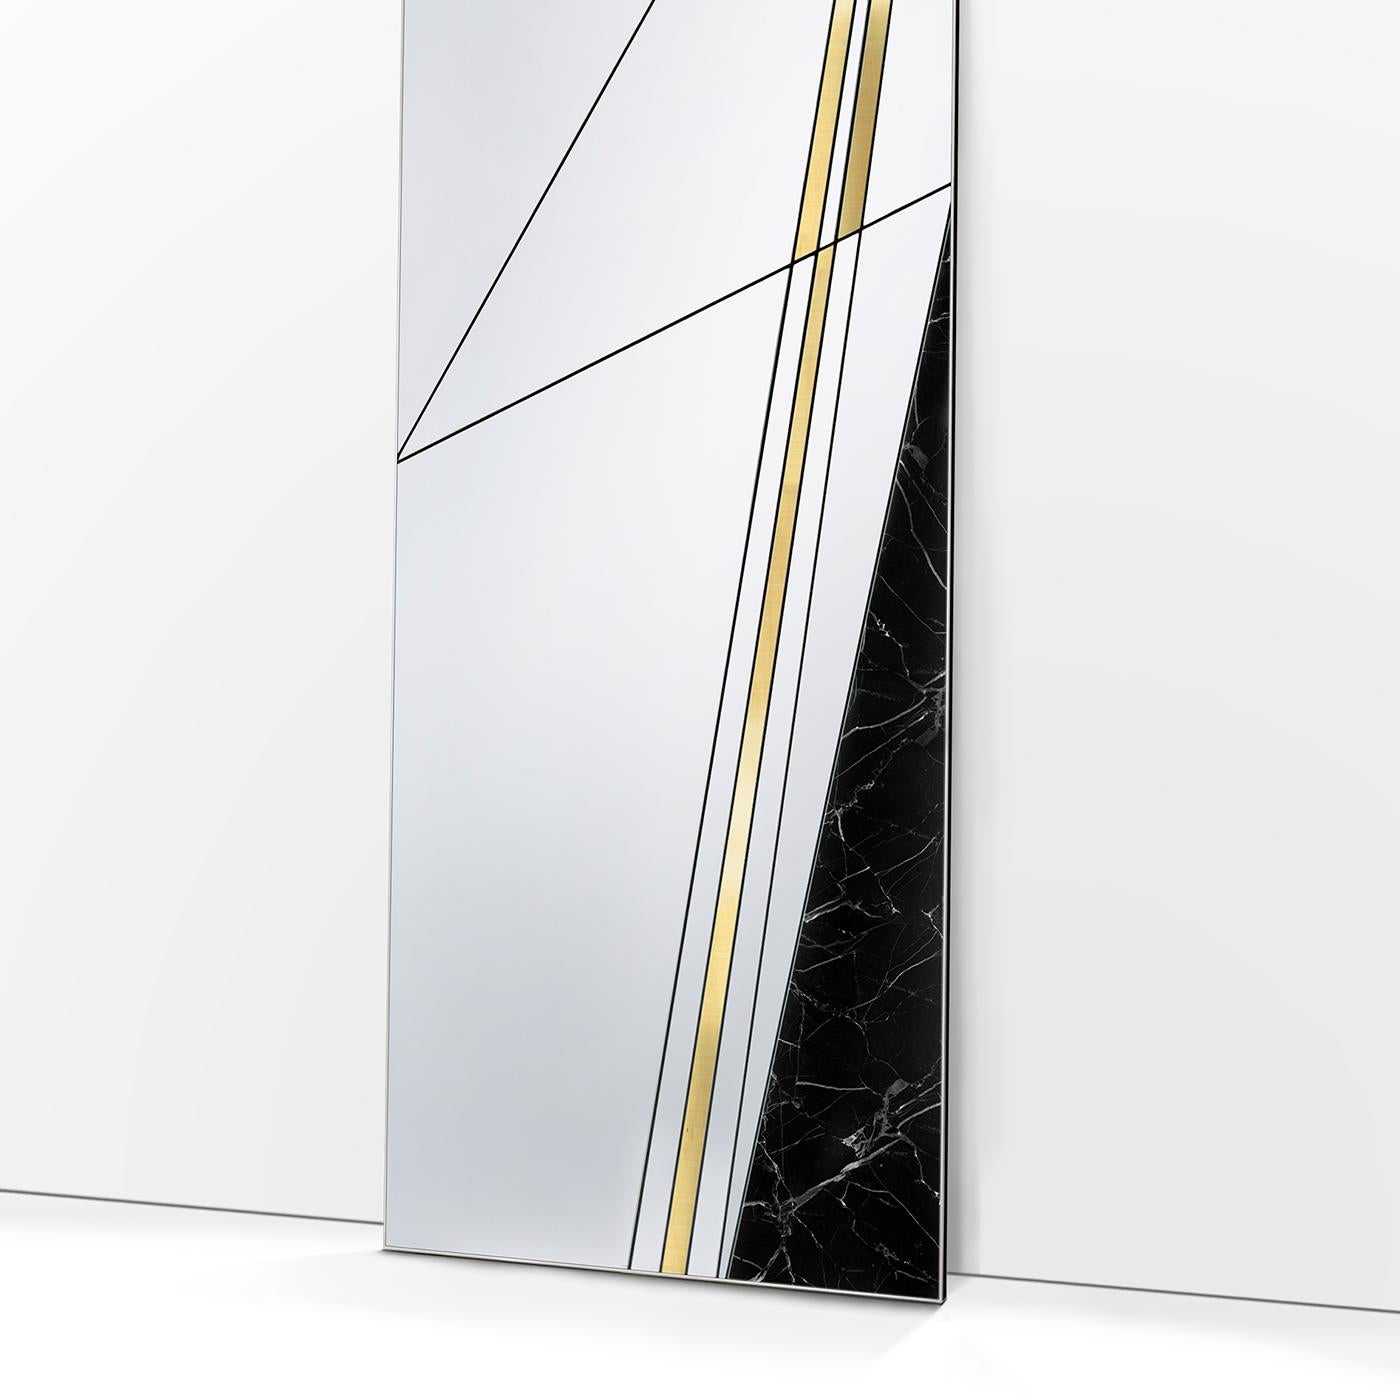 Part of a series of floor mirrors with a bold and sophisticated design, this piece will add an elegant decoration in a contemporary entryway, study, or living room. Its rectangular shape, supported by a wooden base, is made up of a series of